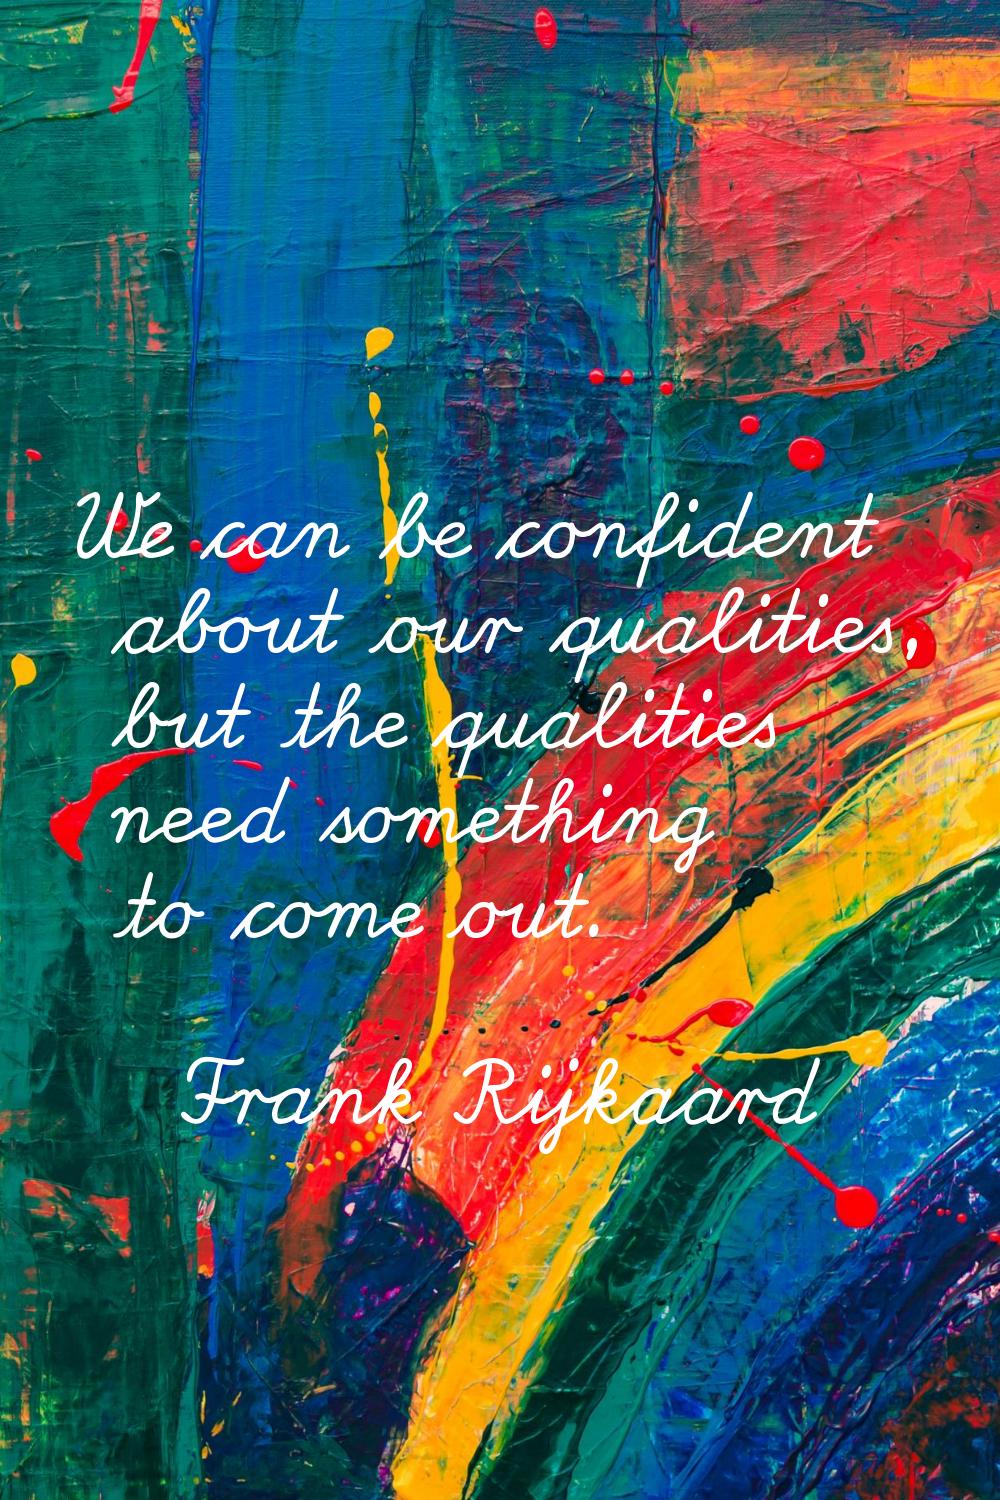 We can be confident about our qualities, but the qualities need something to come out.